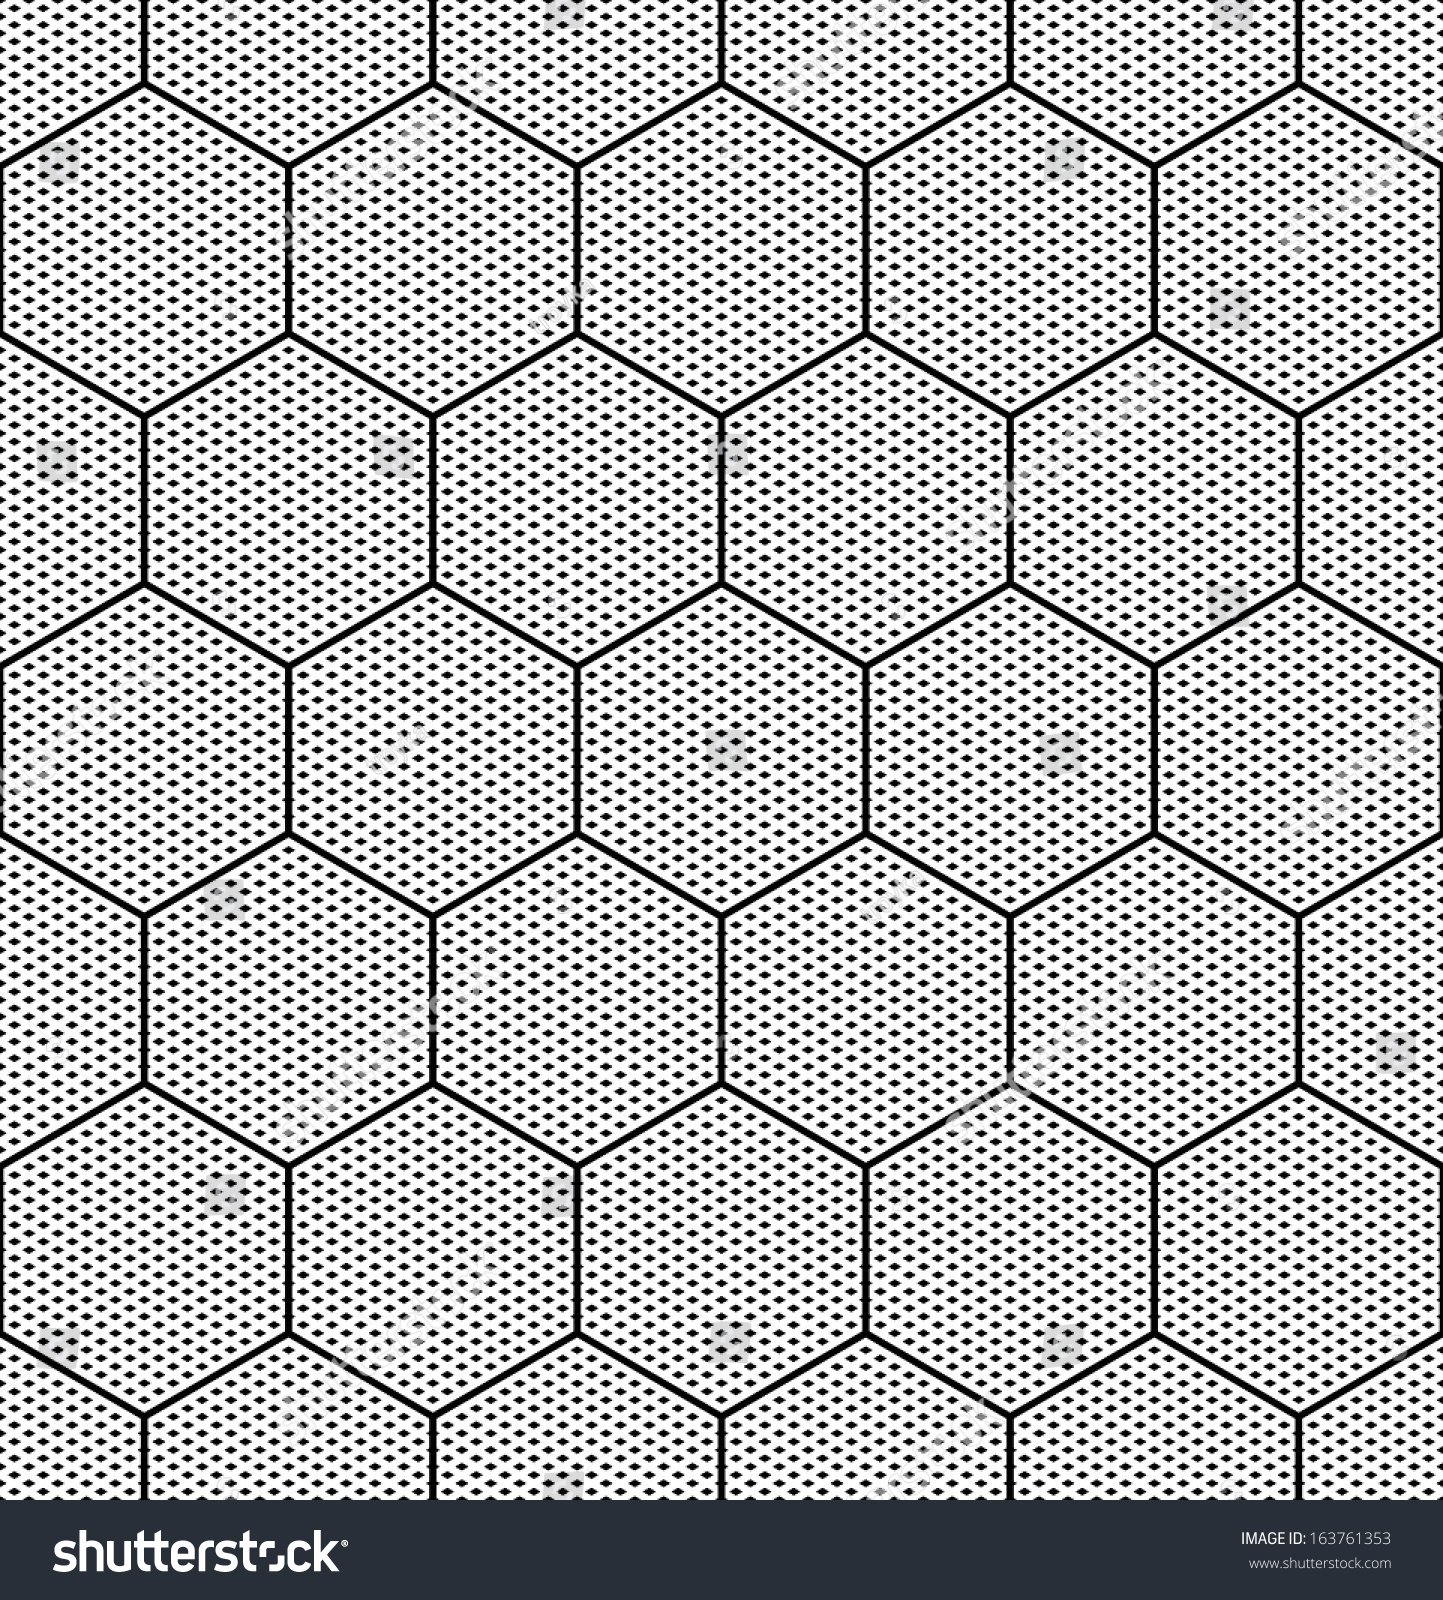 Hexagons Texture Seamless Geometric Pattern Vector Stock Vector Royalty Free